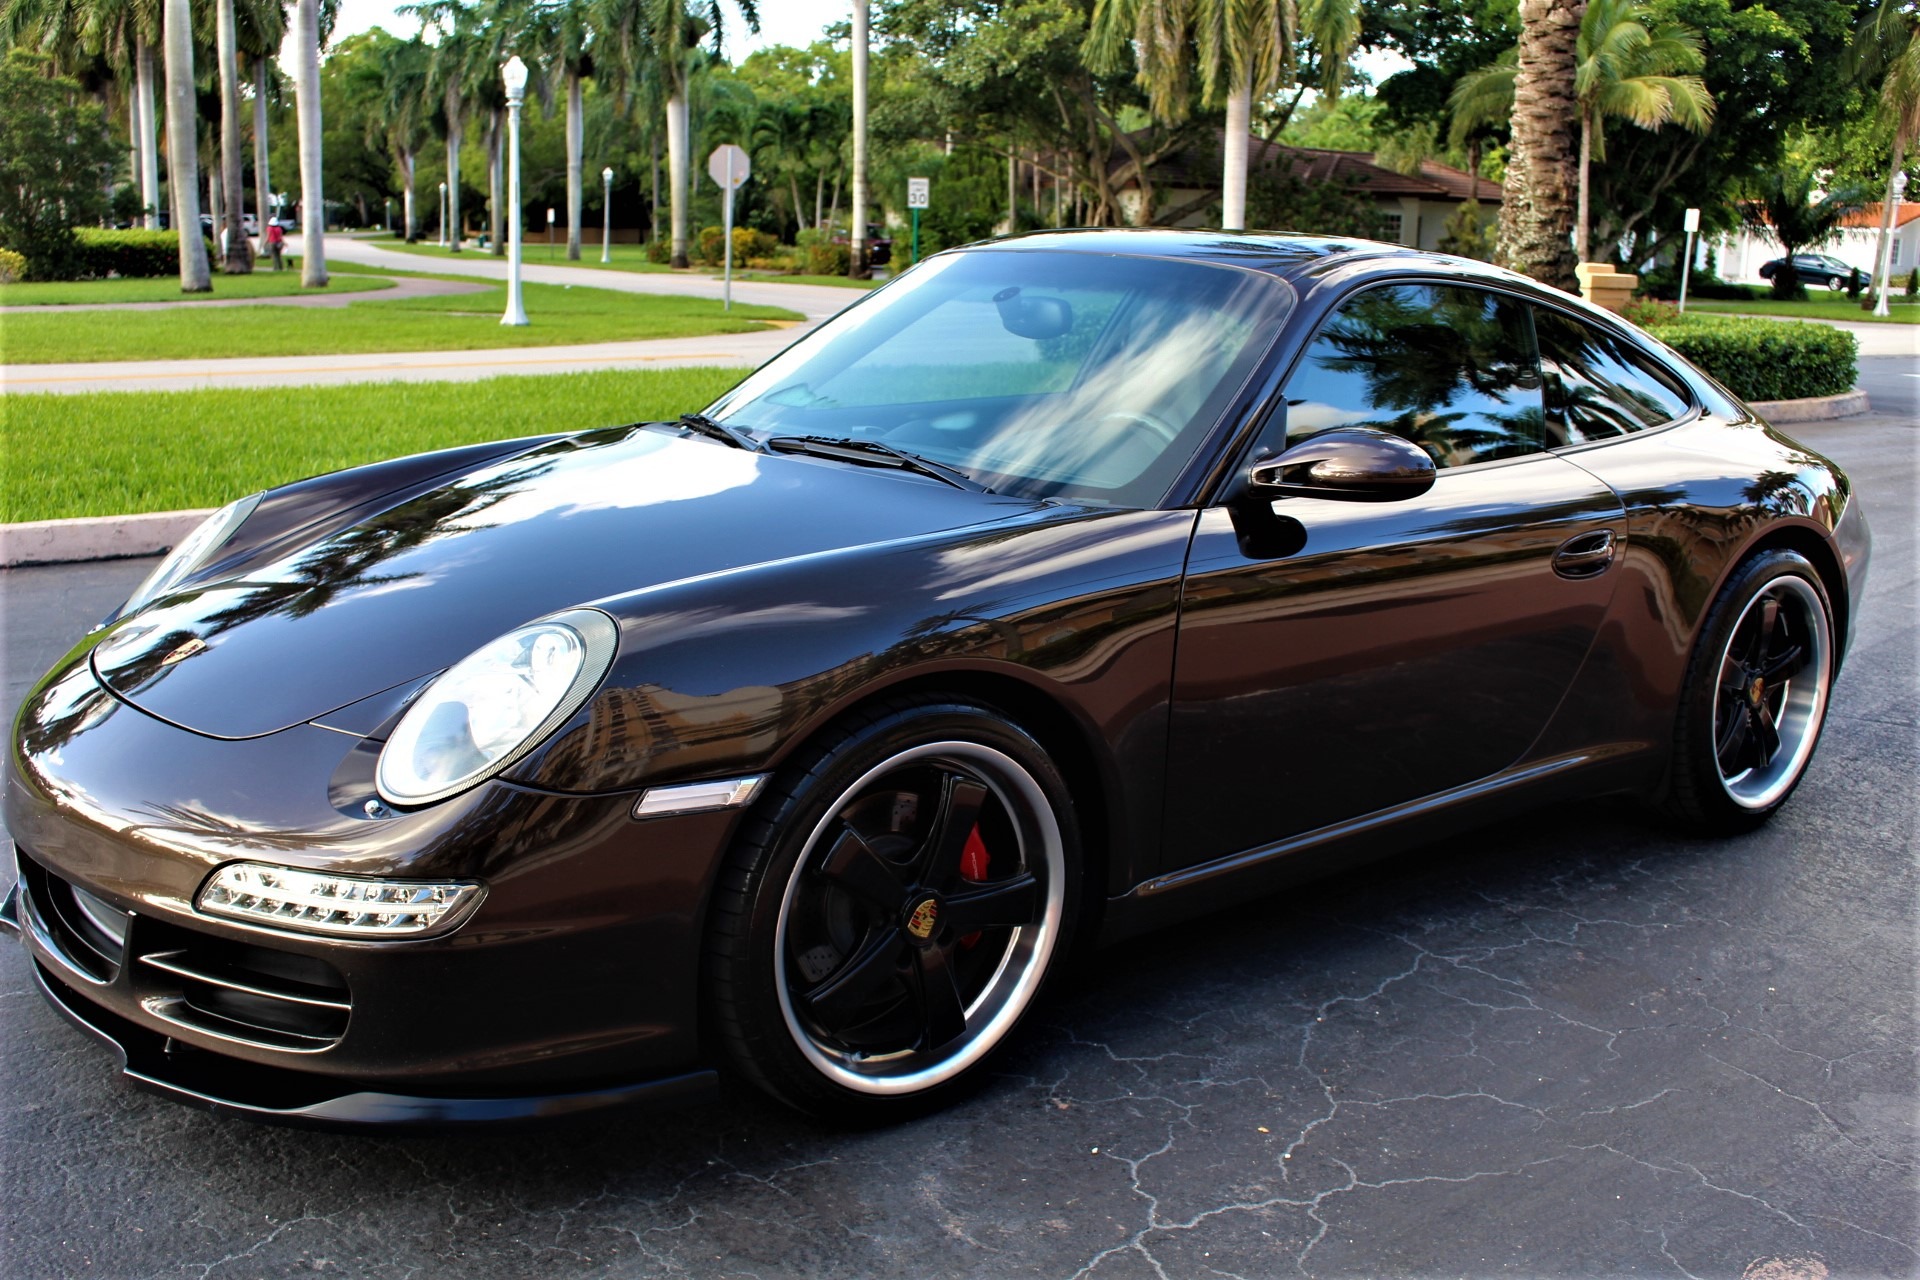 Used 2008 Porsche 911 Carrera S for sale Sold at The Gables Sports Cars in Miami FL 33146 2